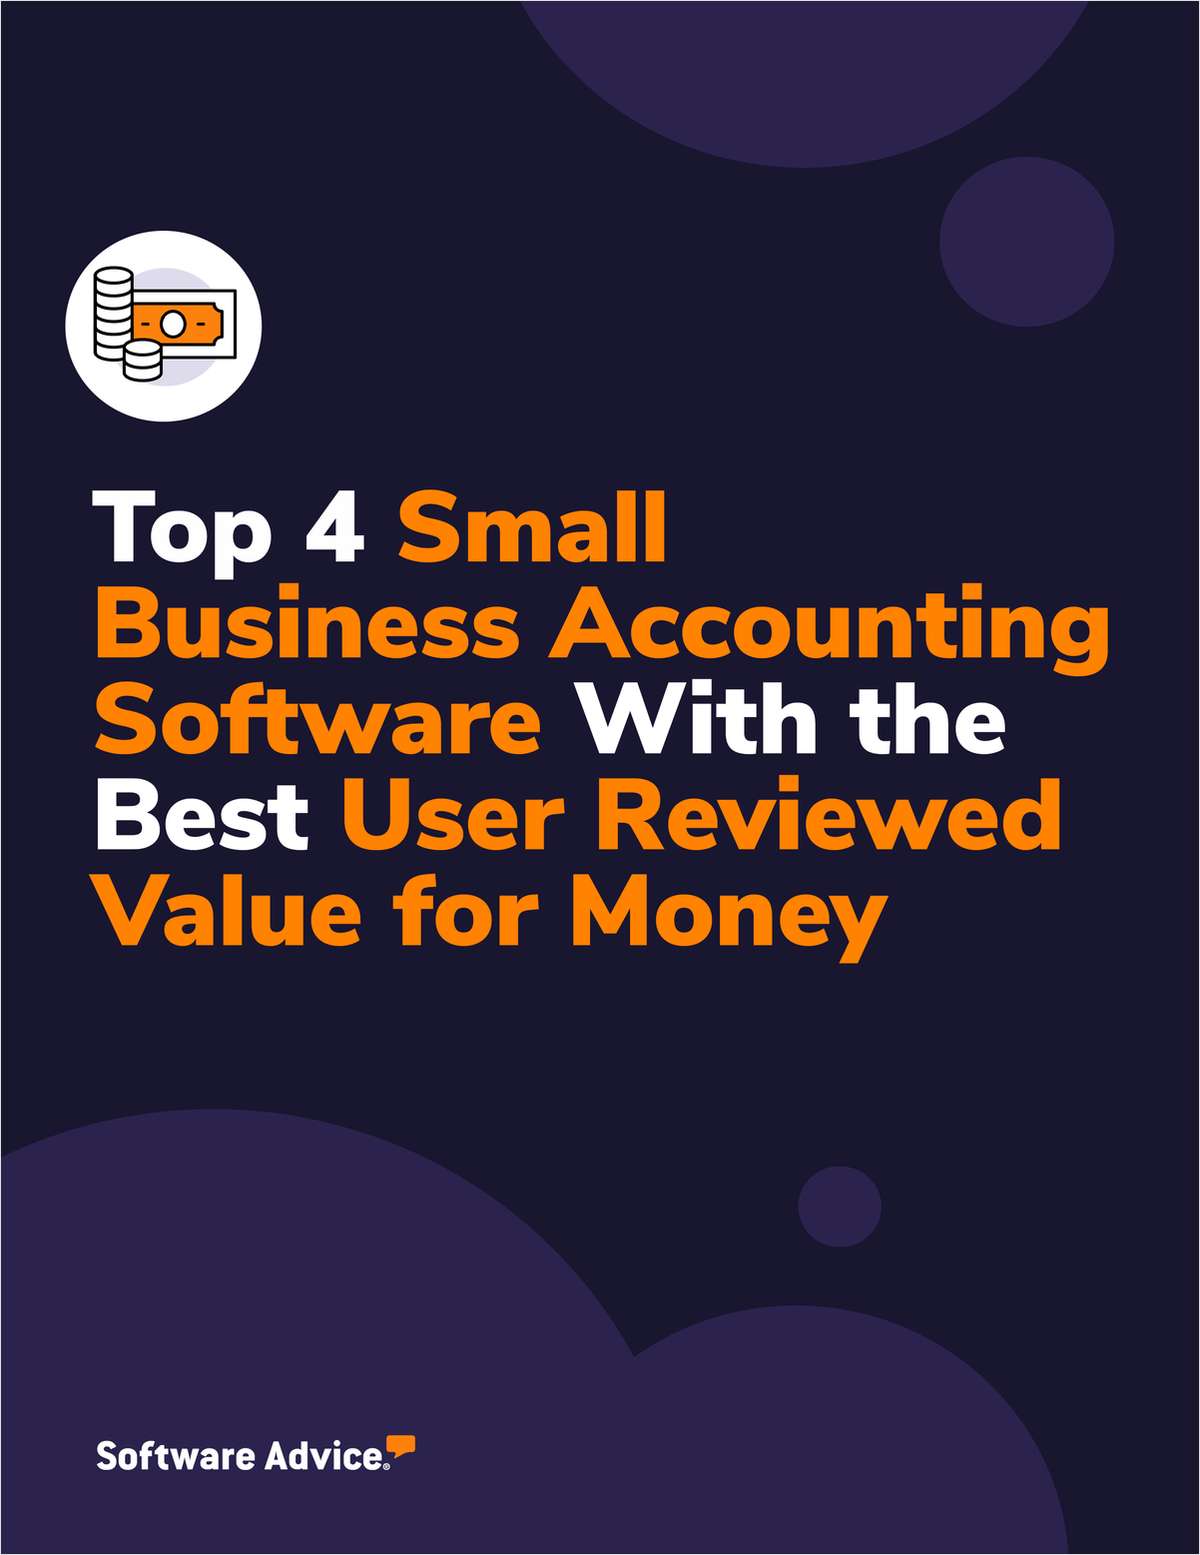 Top 4 Small Business Accounting Software With the Best User Reviewed Value for Money